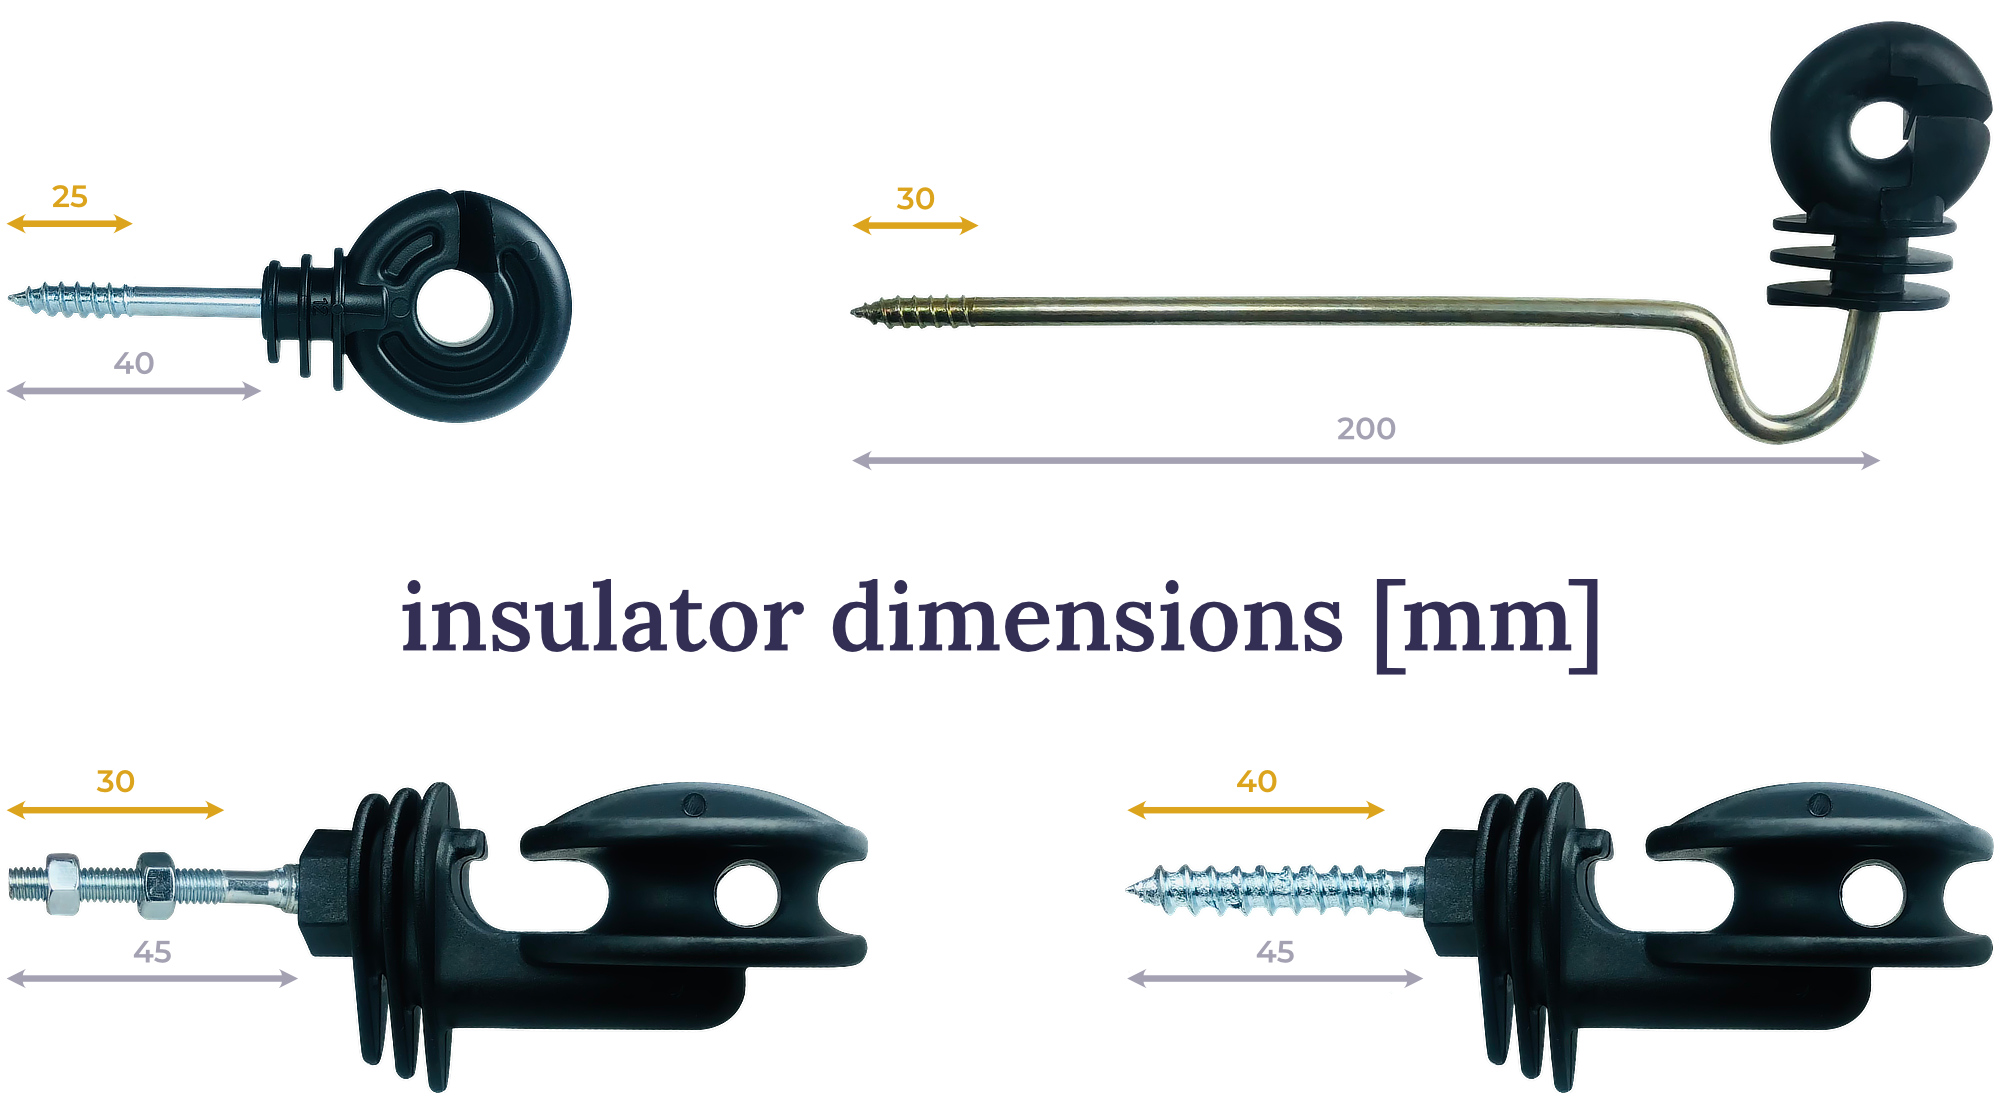 dimensions of insulators for amateur radio users by qro.cz hampart.shop